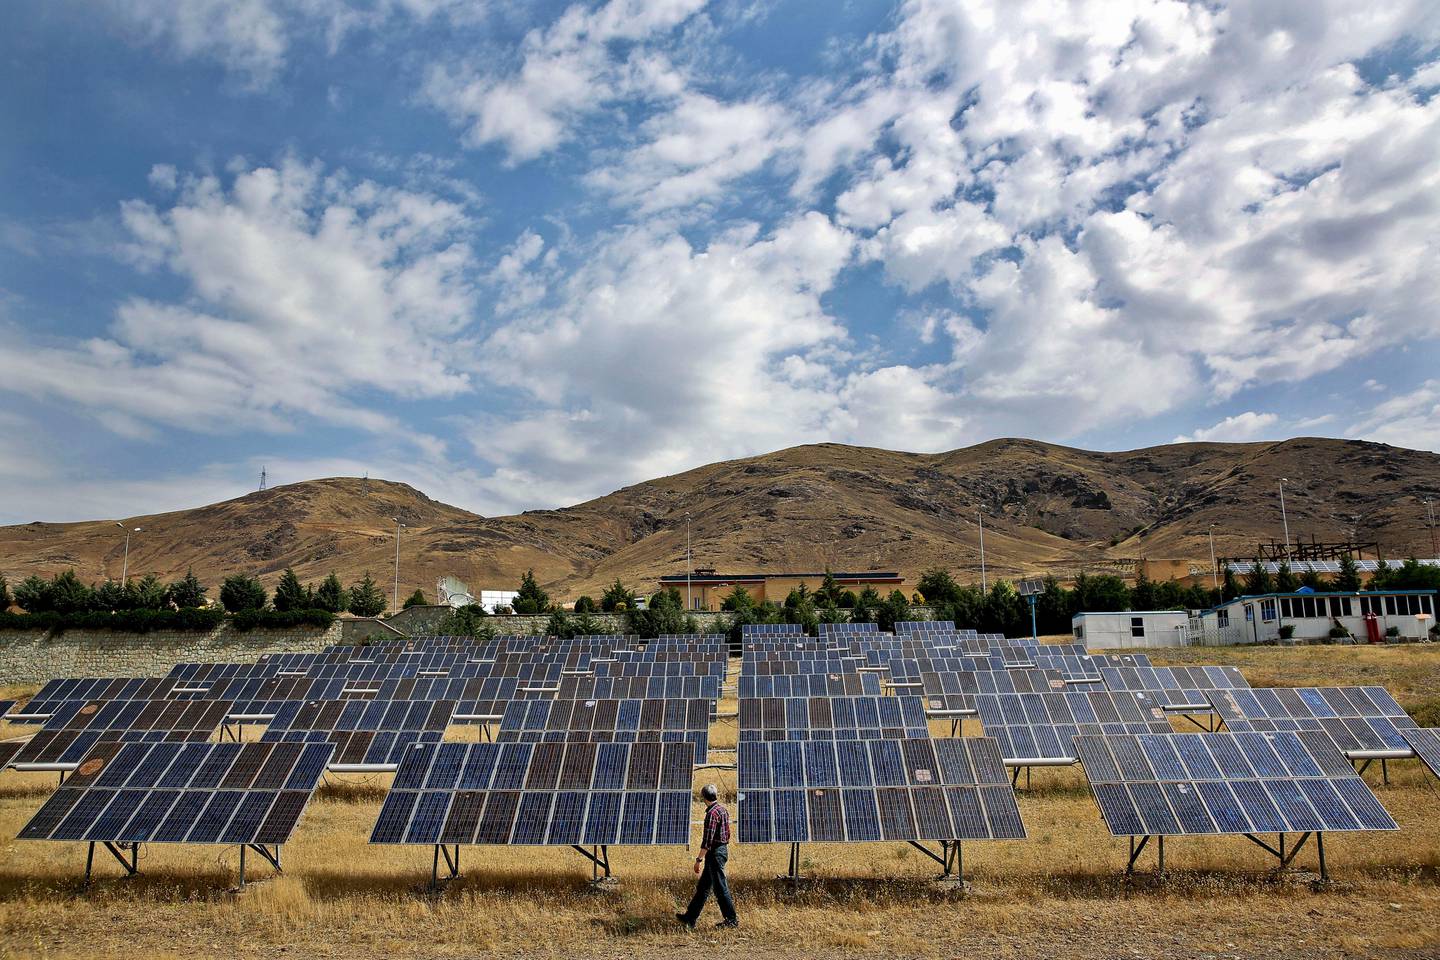 In this June, 22, 2014 photo, a man looks at solar panels at the Taleghan Renewable Energy Site in Taleghan, 160 kilometers (99 miles) northwest of capital Tehran, Iran. President Hassan Rouhani?s government has quintupled its spending on solar power projects in the last year, taking advantage of Iran?s 300-odd days of sunshine a year that make its vast sun-kissed lands one of the best spots on earth to host solar panels. While being good for the environment, the panels also offer rural Iran steady power amid uncertainty over the country?s contested nuclear program as it negotiates with world powers. (AP Photo/Ebrahim Noroozi)